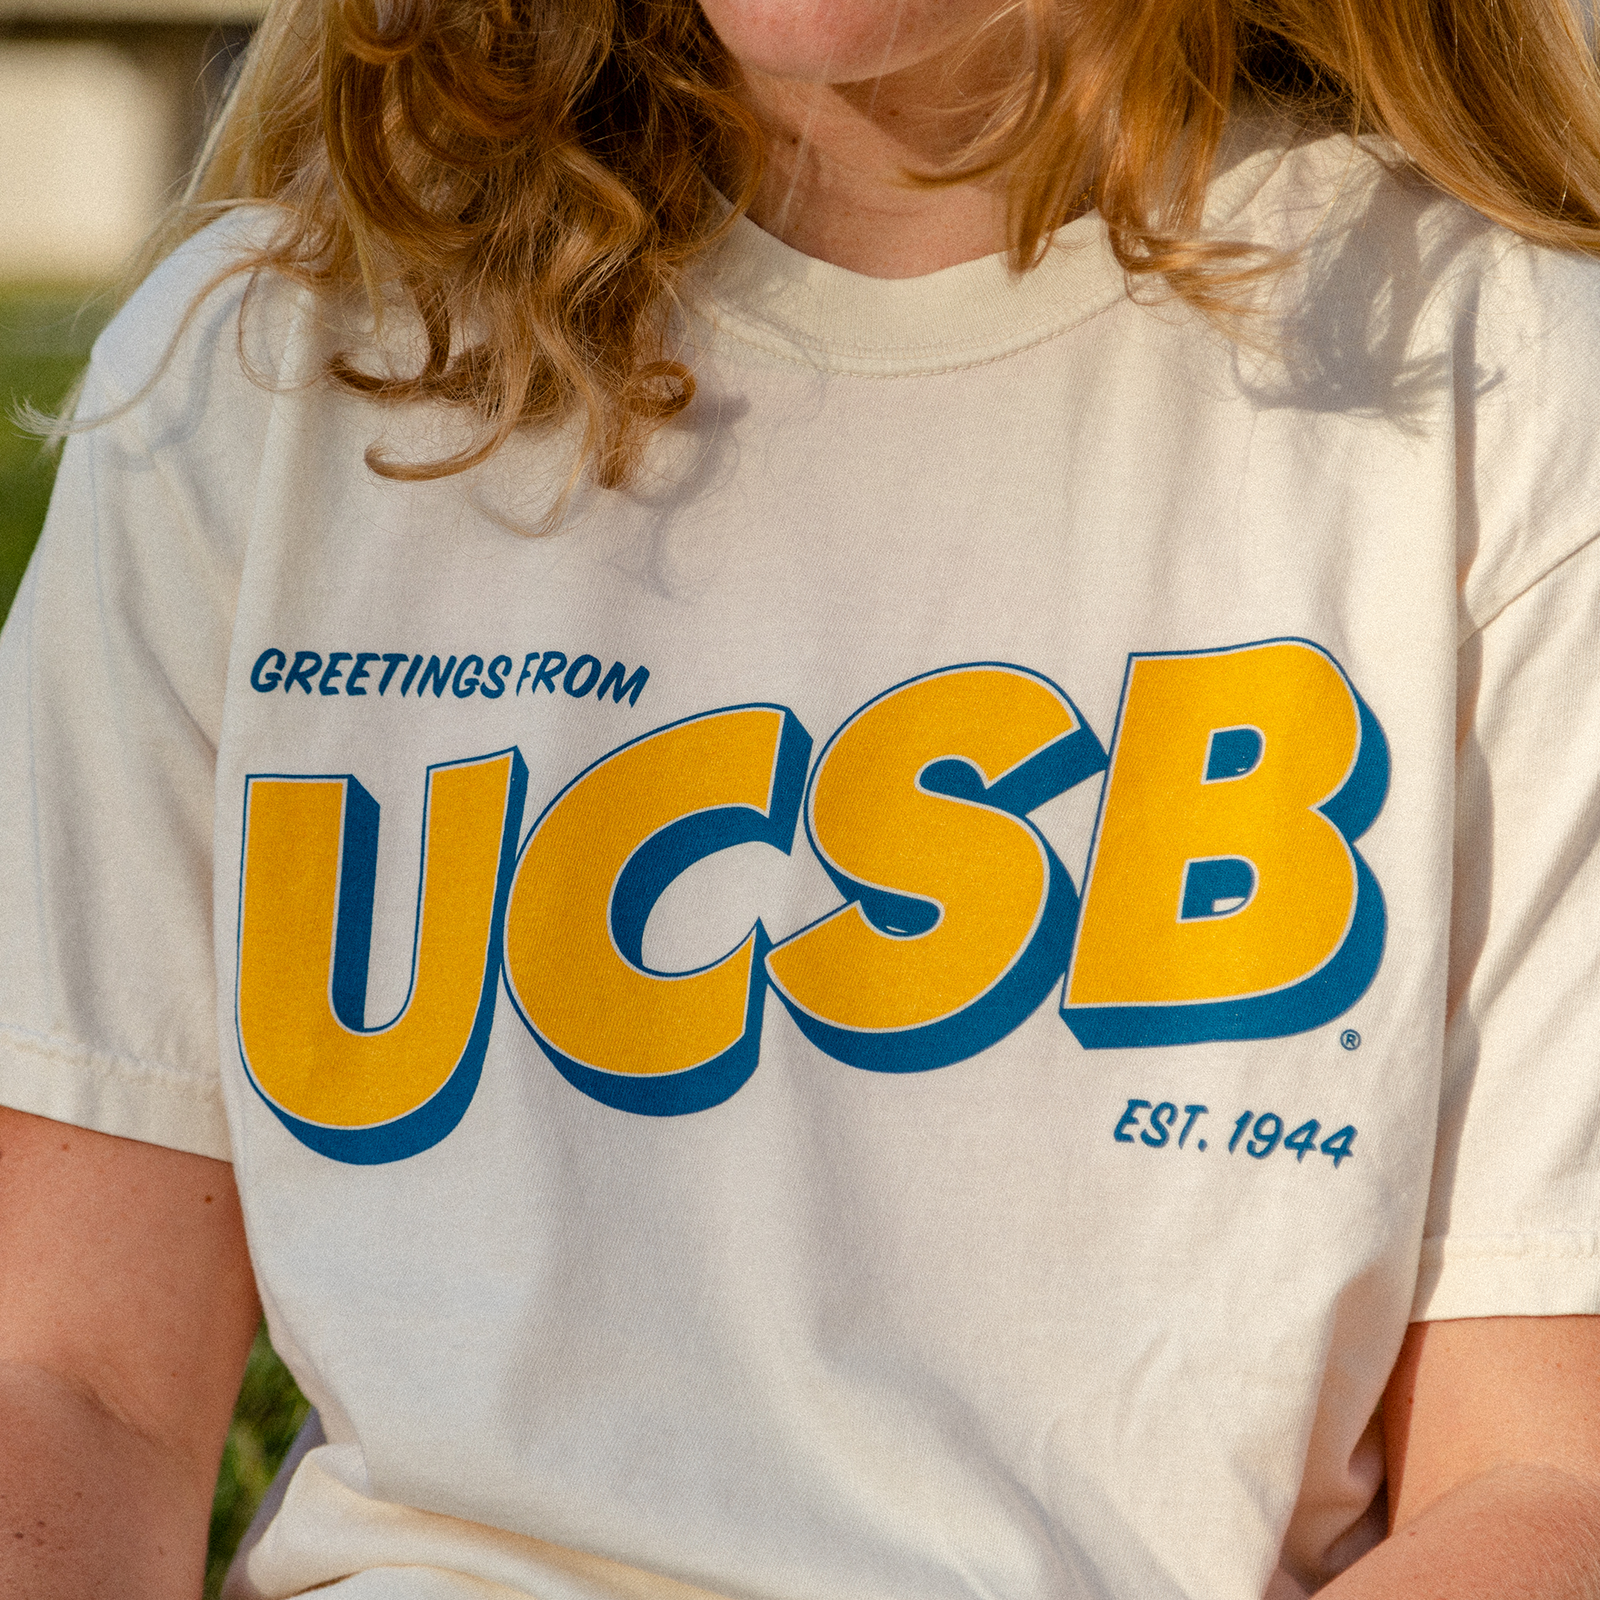 Greetings from UCSB Tee